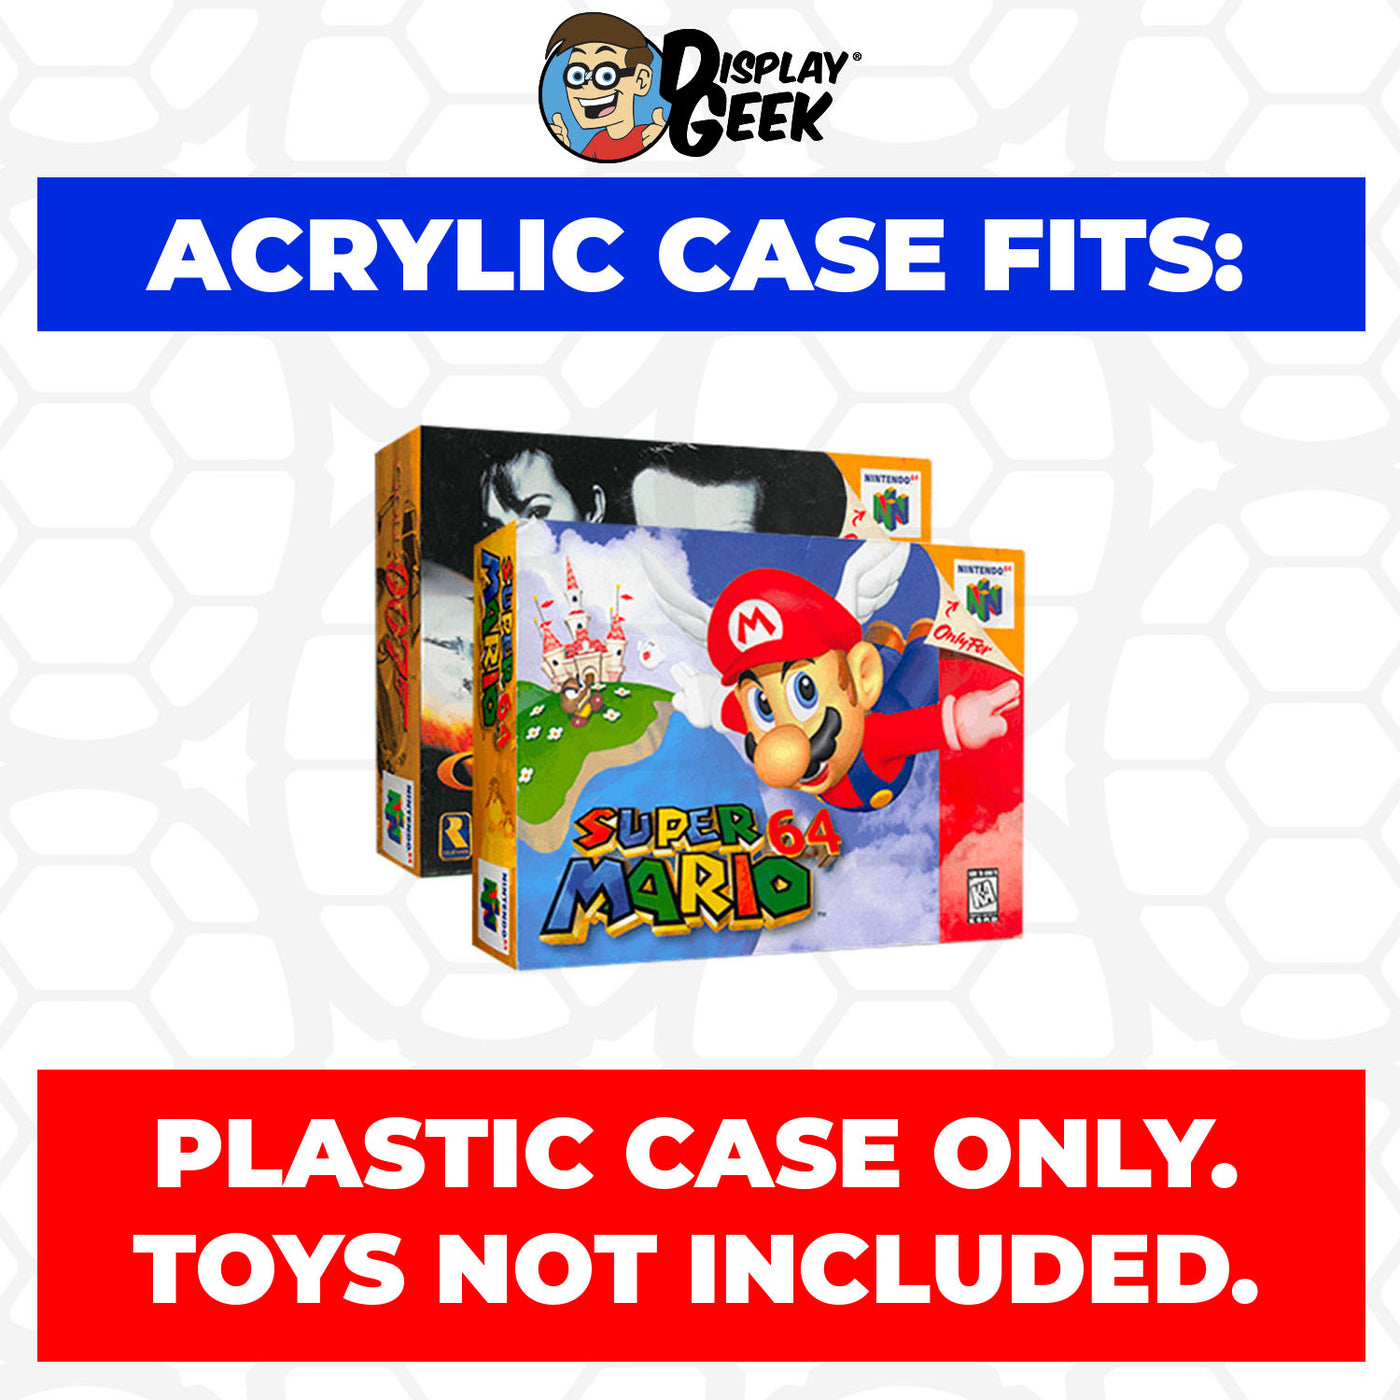 Acrylic Case for Standard N64 Nintendo 64 Video Game Boxes on The Protector Guide App by Display Geek